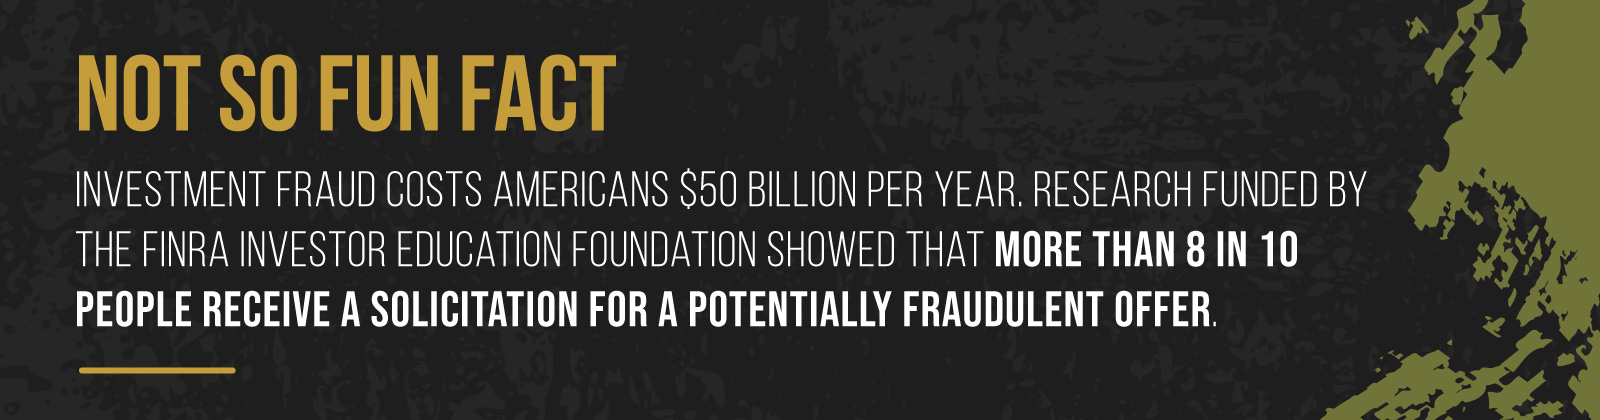 NOT SO FUN FACT - Investment fraud costs Americans $50 billion per year. Research funded by the FINRA Investor Education Foundation showed that more than eight in 10 people receive a solicitation for a potentially fraudulent offer.